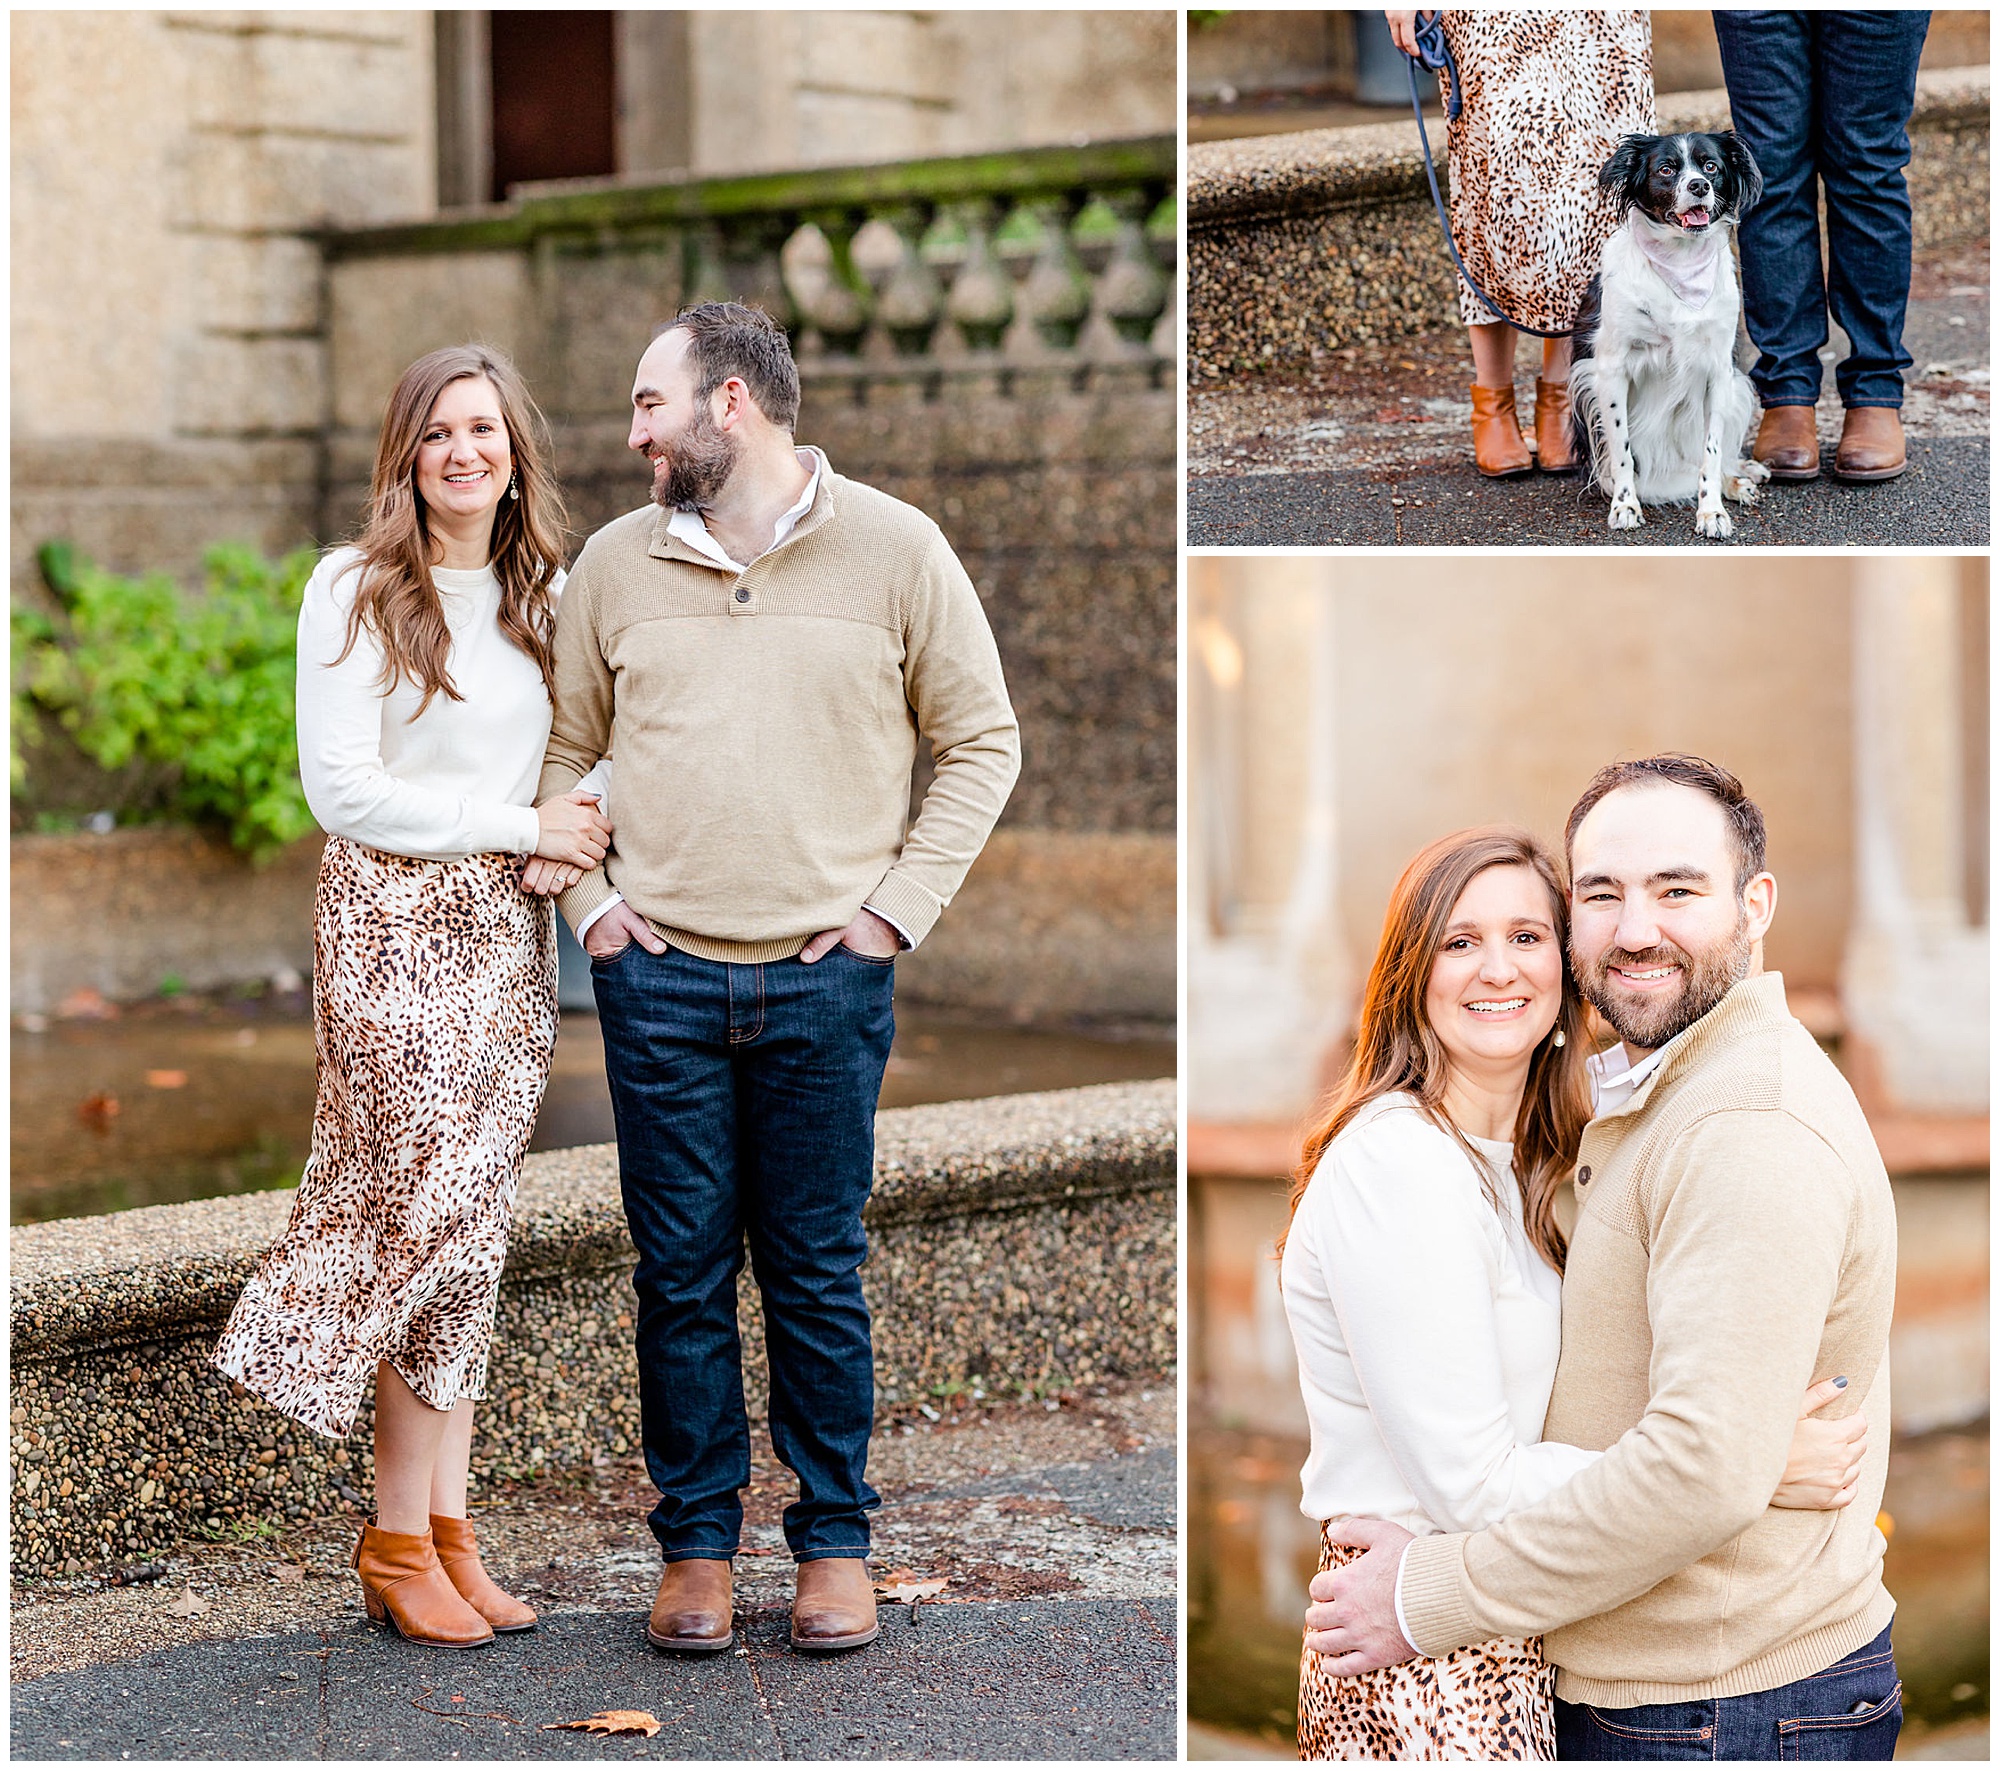 Meridian Hill Park engagement session, Meridian Hill Park DC, DC engagement photography, DC engagement photos, DC engagement session, DC engagement photographer, DC proposal photographer, DC wedding photographer, autumn engagement photos, Rachel E.H. Photography, couple linking arms, dog sitting at feet, maxi cheetah print skirt, couple smiling